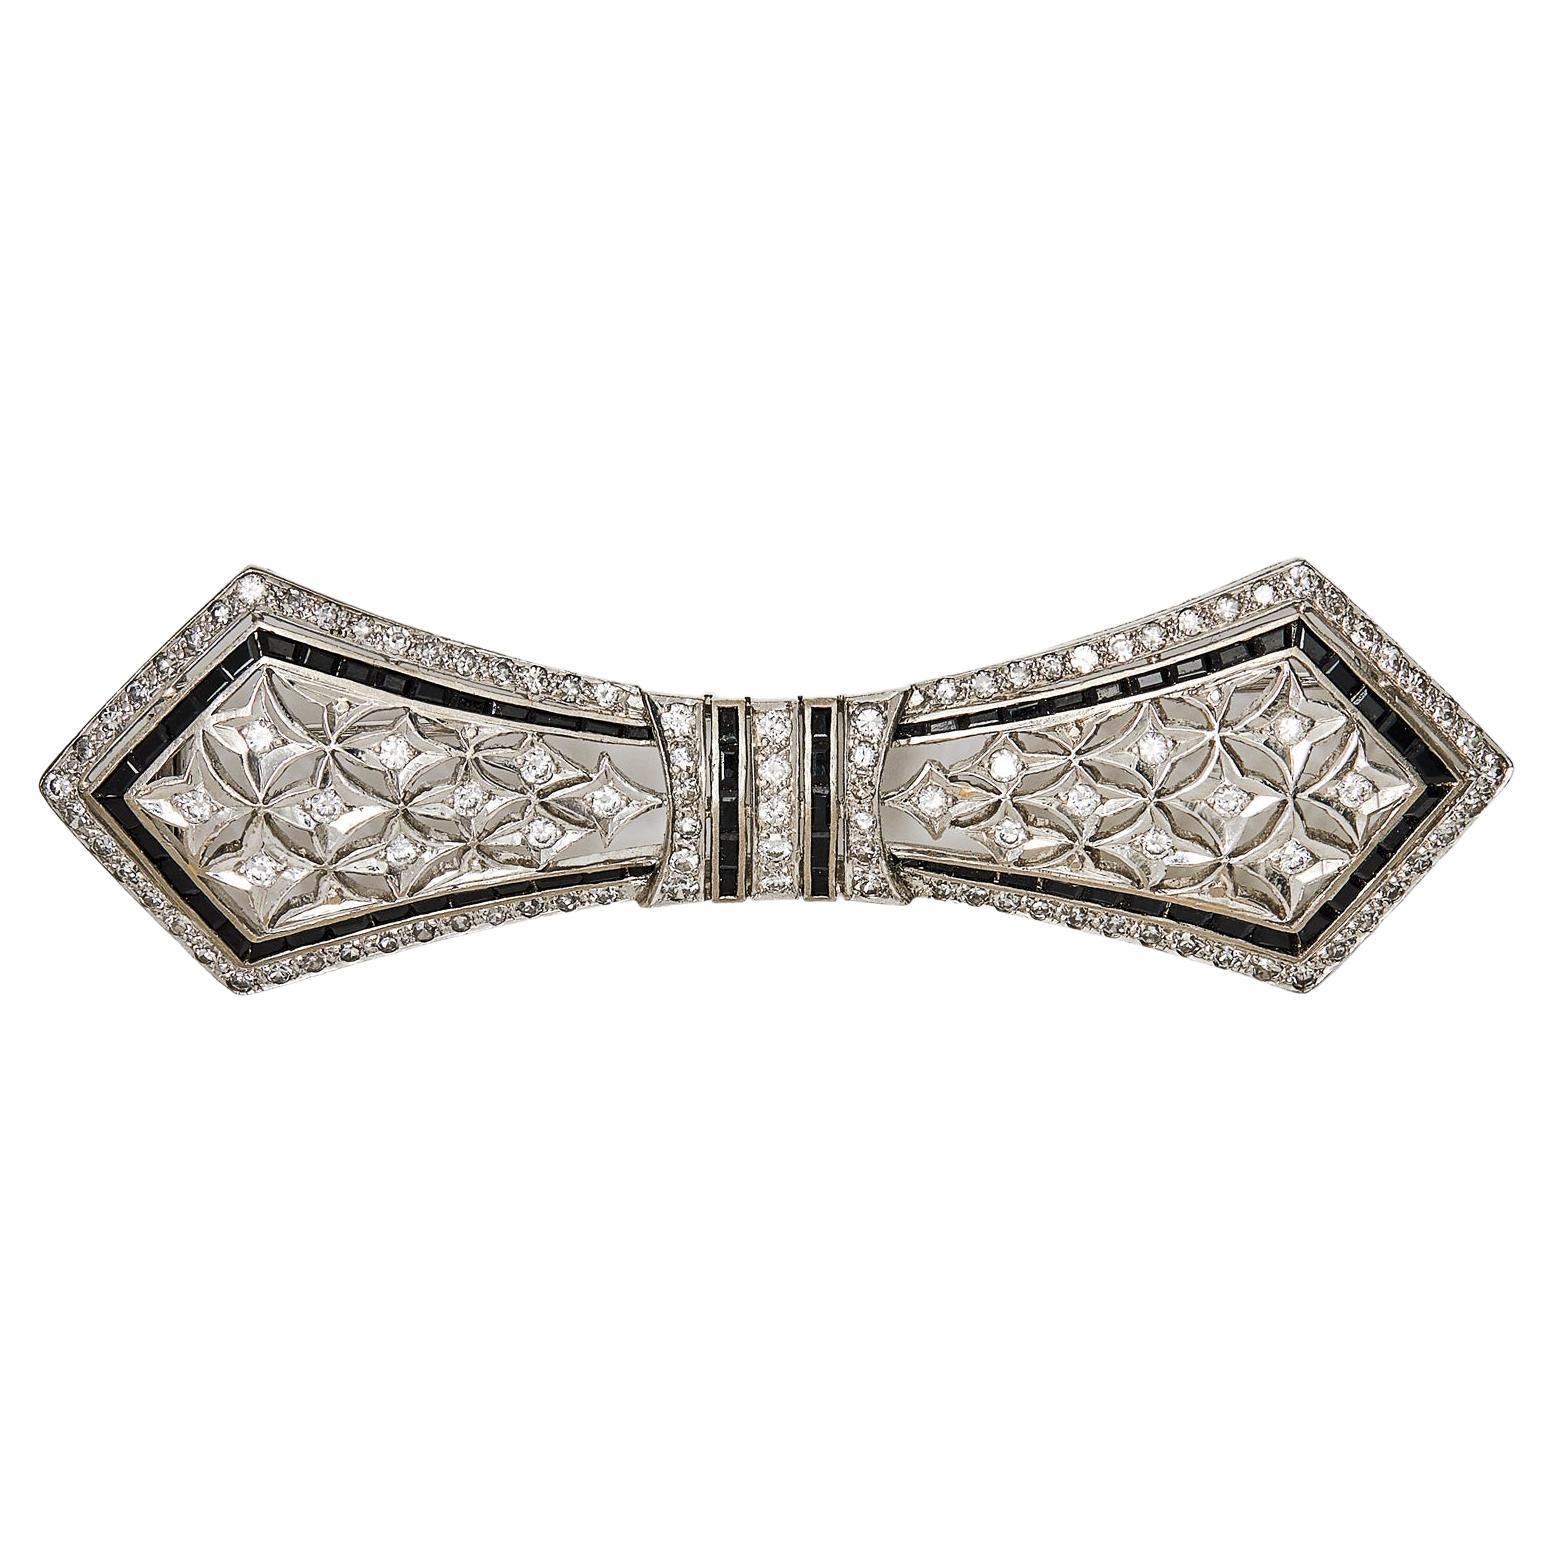  Antique White and Black Diamonds Brooch For Sale